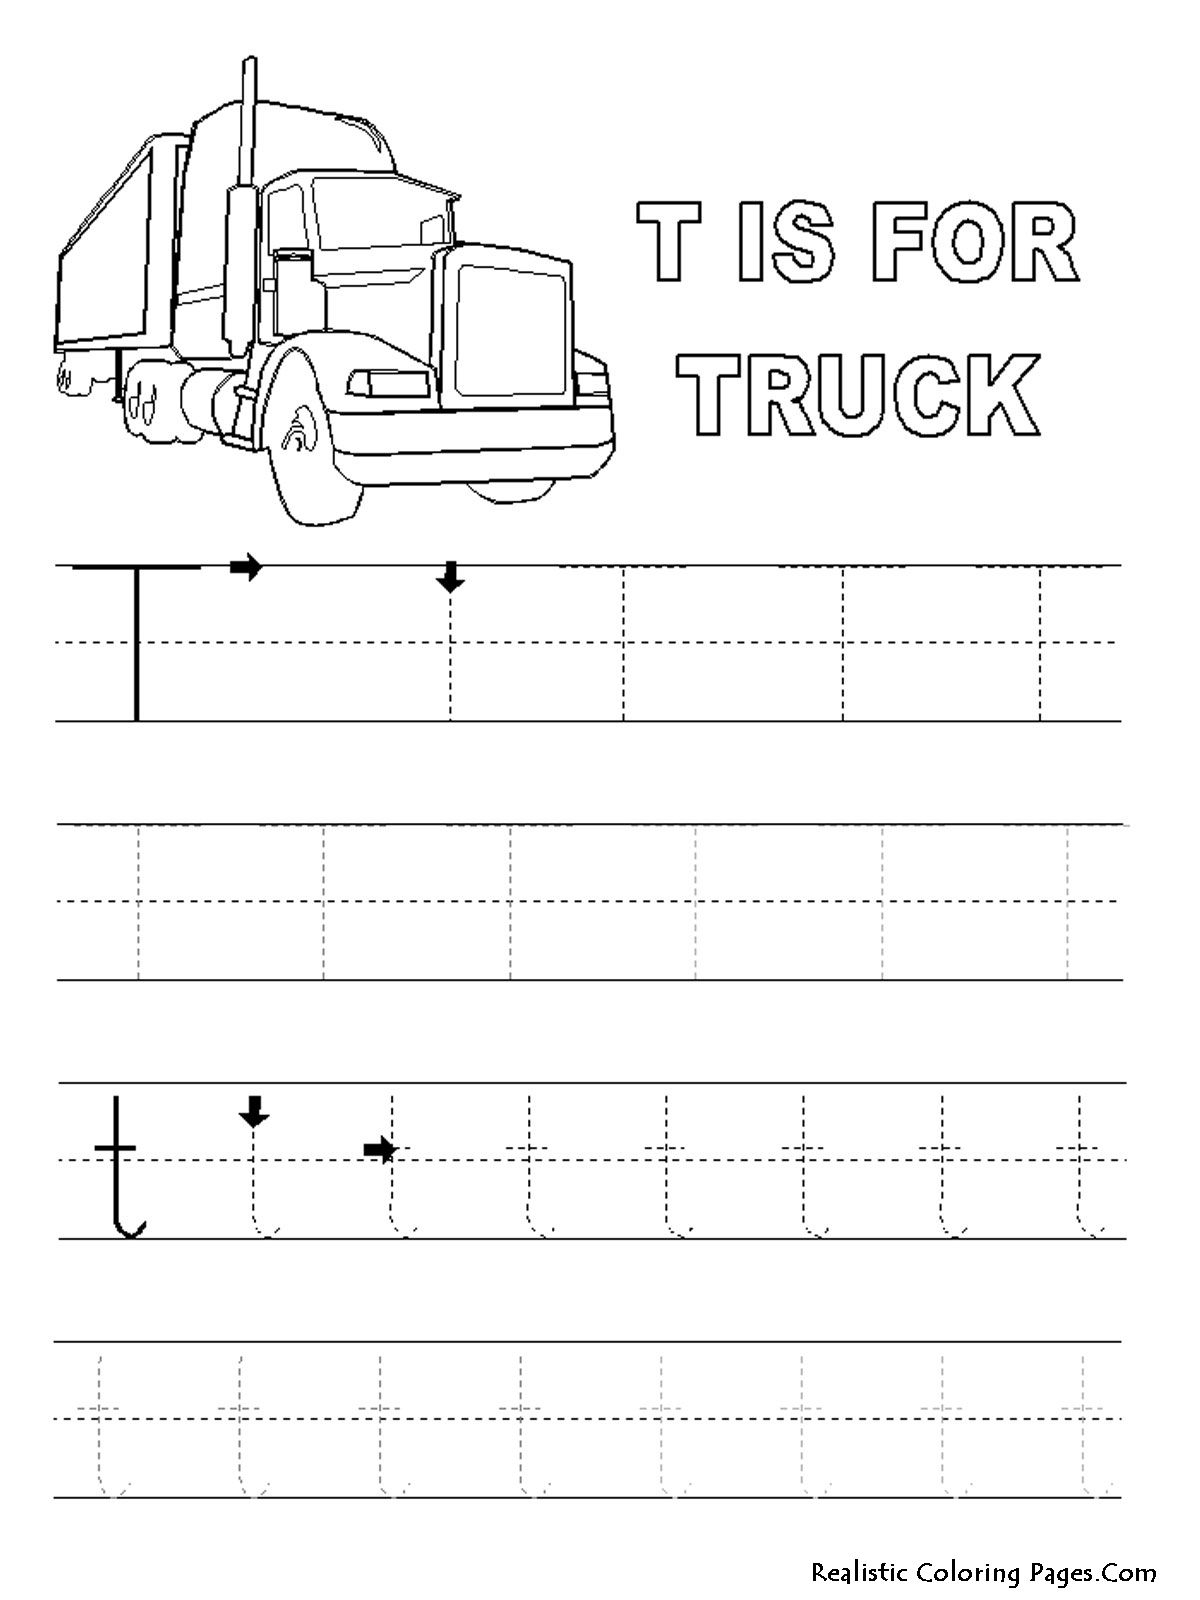 Letter T Worksheets And Coloring Pages For Preschoolers for Letter T Worksheets For Kinder